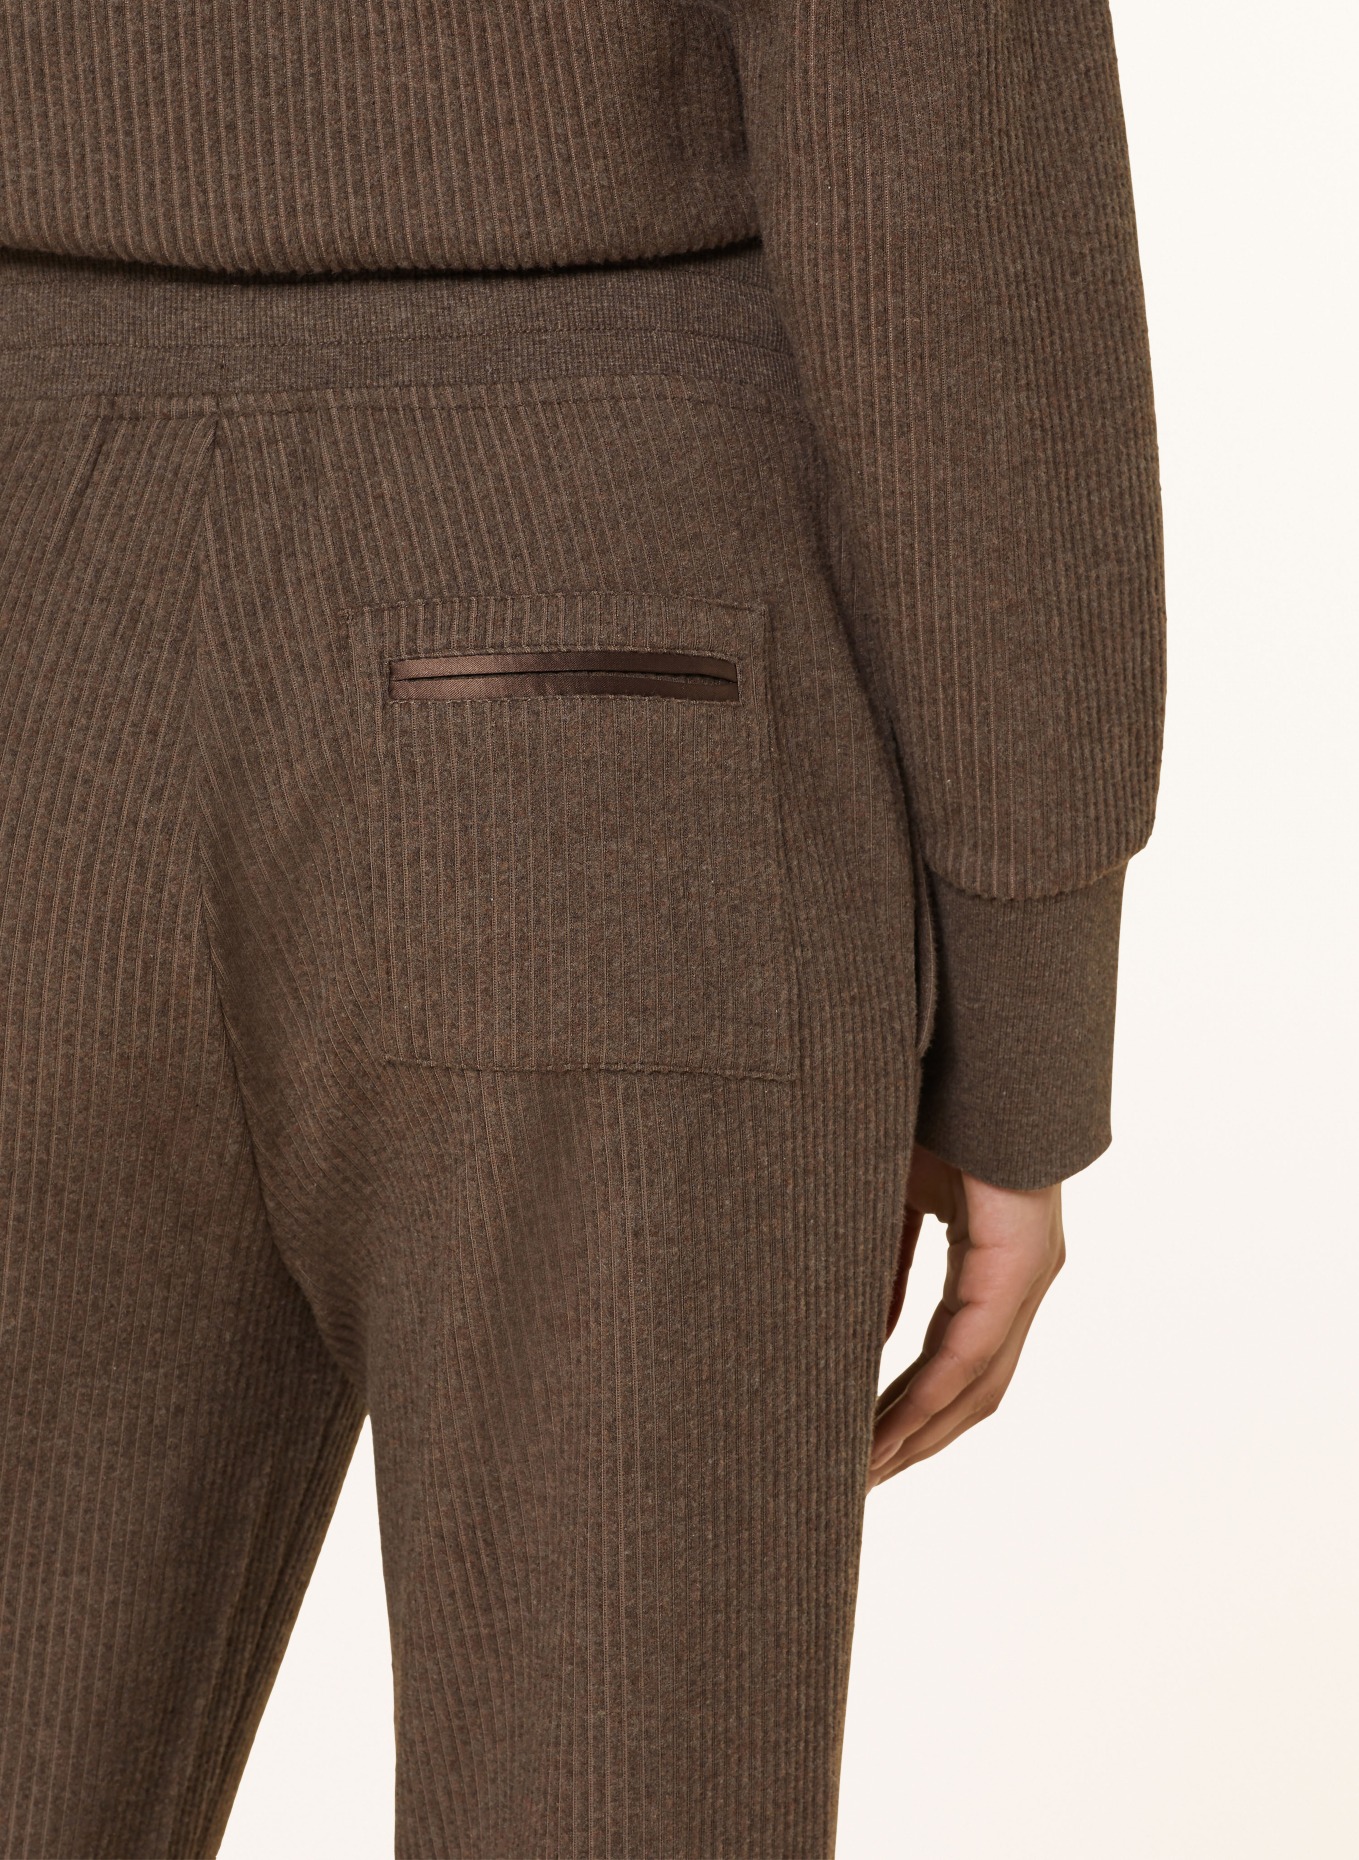 VARLEY Pants RUSSELL in jogger style, Color: BROWN (Image 5)